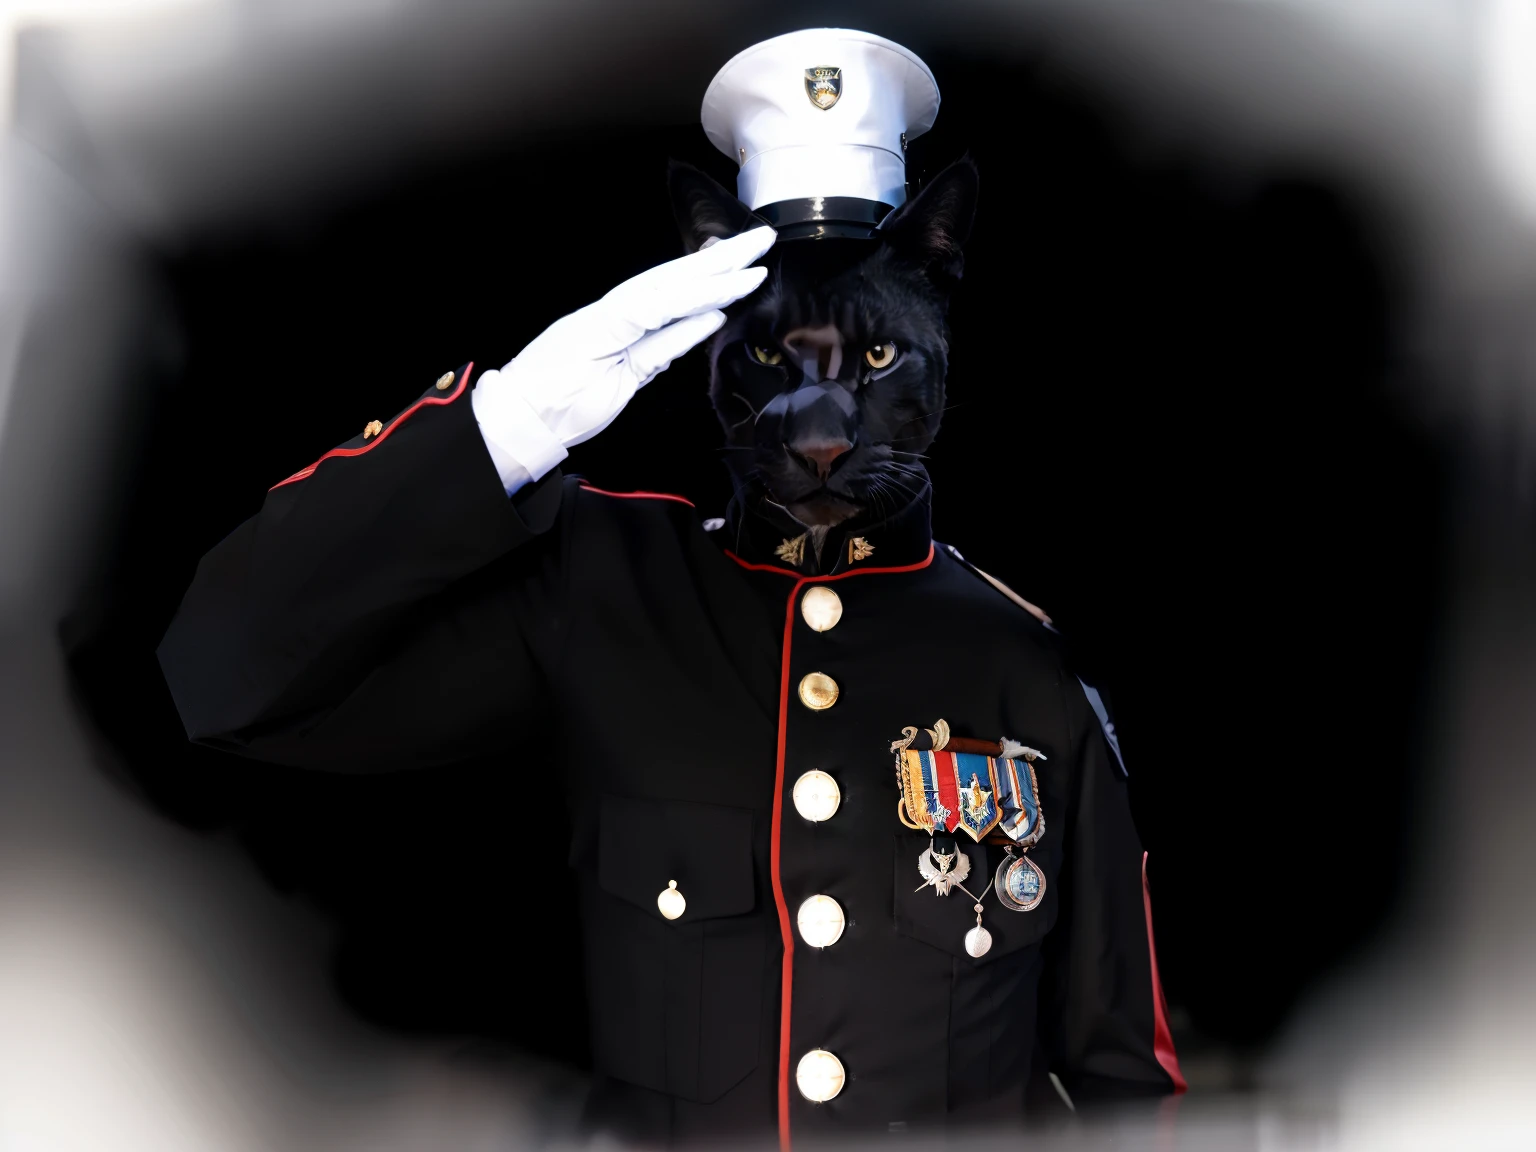 anthro male cat marine in formal uniform saluting, (black cat 1:1), black panther, (cat), male feline character, futuristic marine anthro character, photo realistic, photo real, masterpiece, (anthro male cat), hyper realistic black cat in formal marine uniform